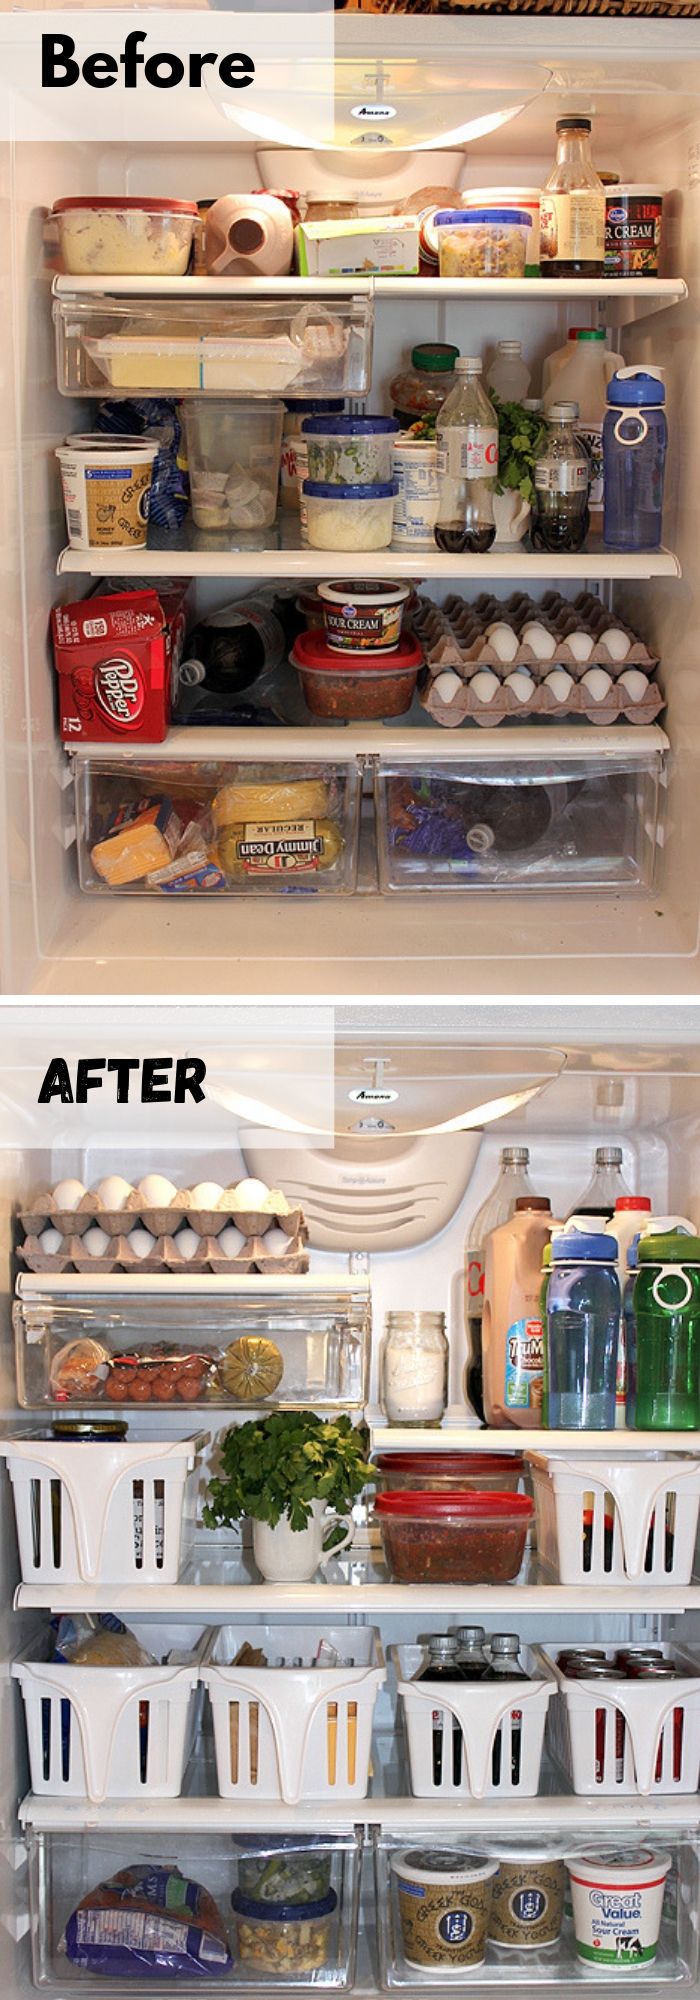 23 tips to organize home